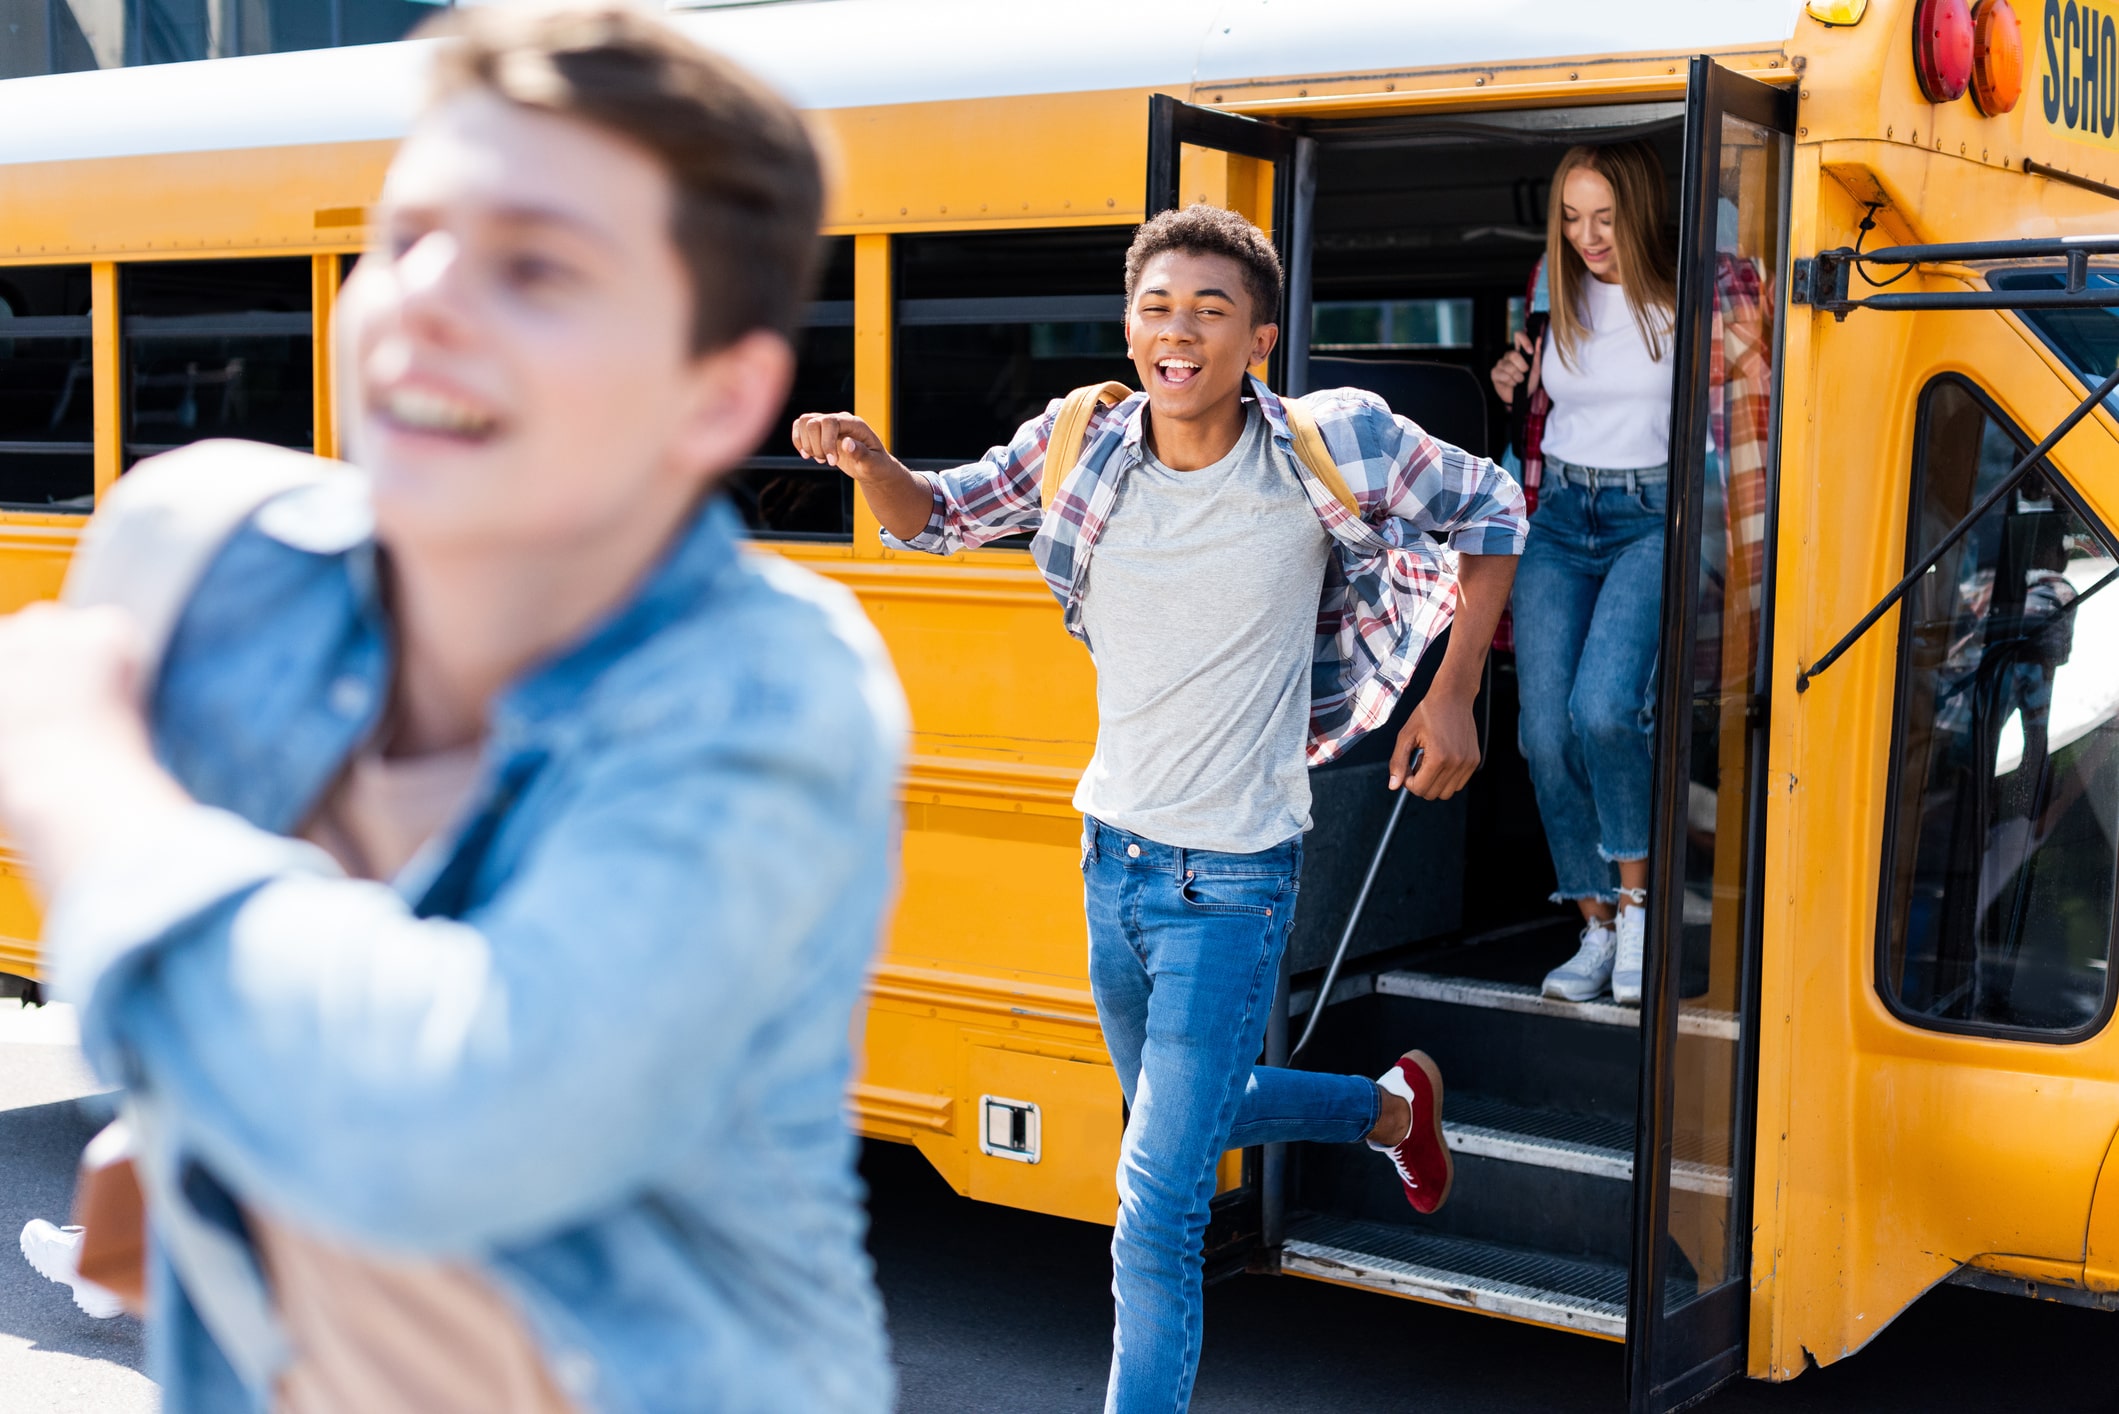 Three young people are seen descending from the steps of a yellow school bus